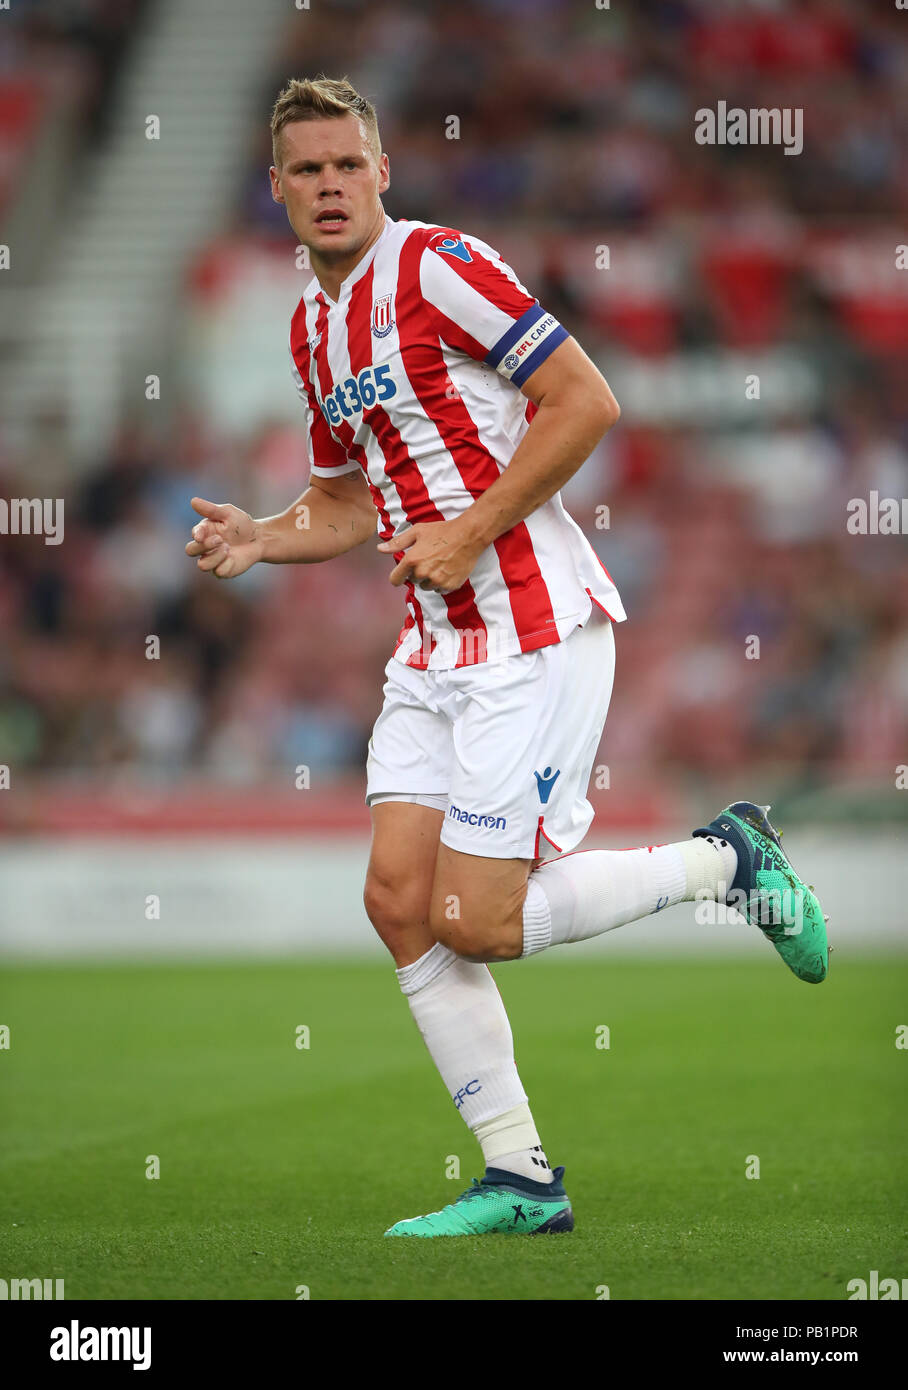 Stoke City's Ryan Shawcross during a pre season friendly match at The Bet365 Stadium, Stoke. PRESS ASSOCIATION Photo. Picture date: Wednesday July 25, 2018. Photo credit should read: Nick Potts/PA Wire. EDITORIAL USE ONLY No use with unauthorised audio, video, data, fixture lists, club/league logos or 'live' services. Online in-match use limited to 75 images, no video emulation. No use in betting, games or single club/league/player publications. Stock Photo